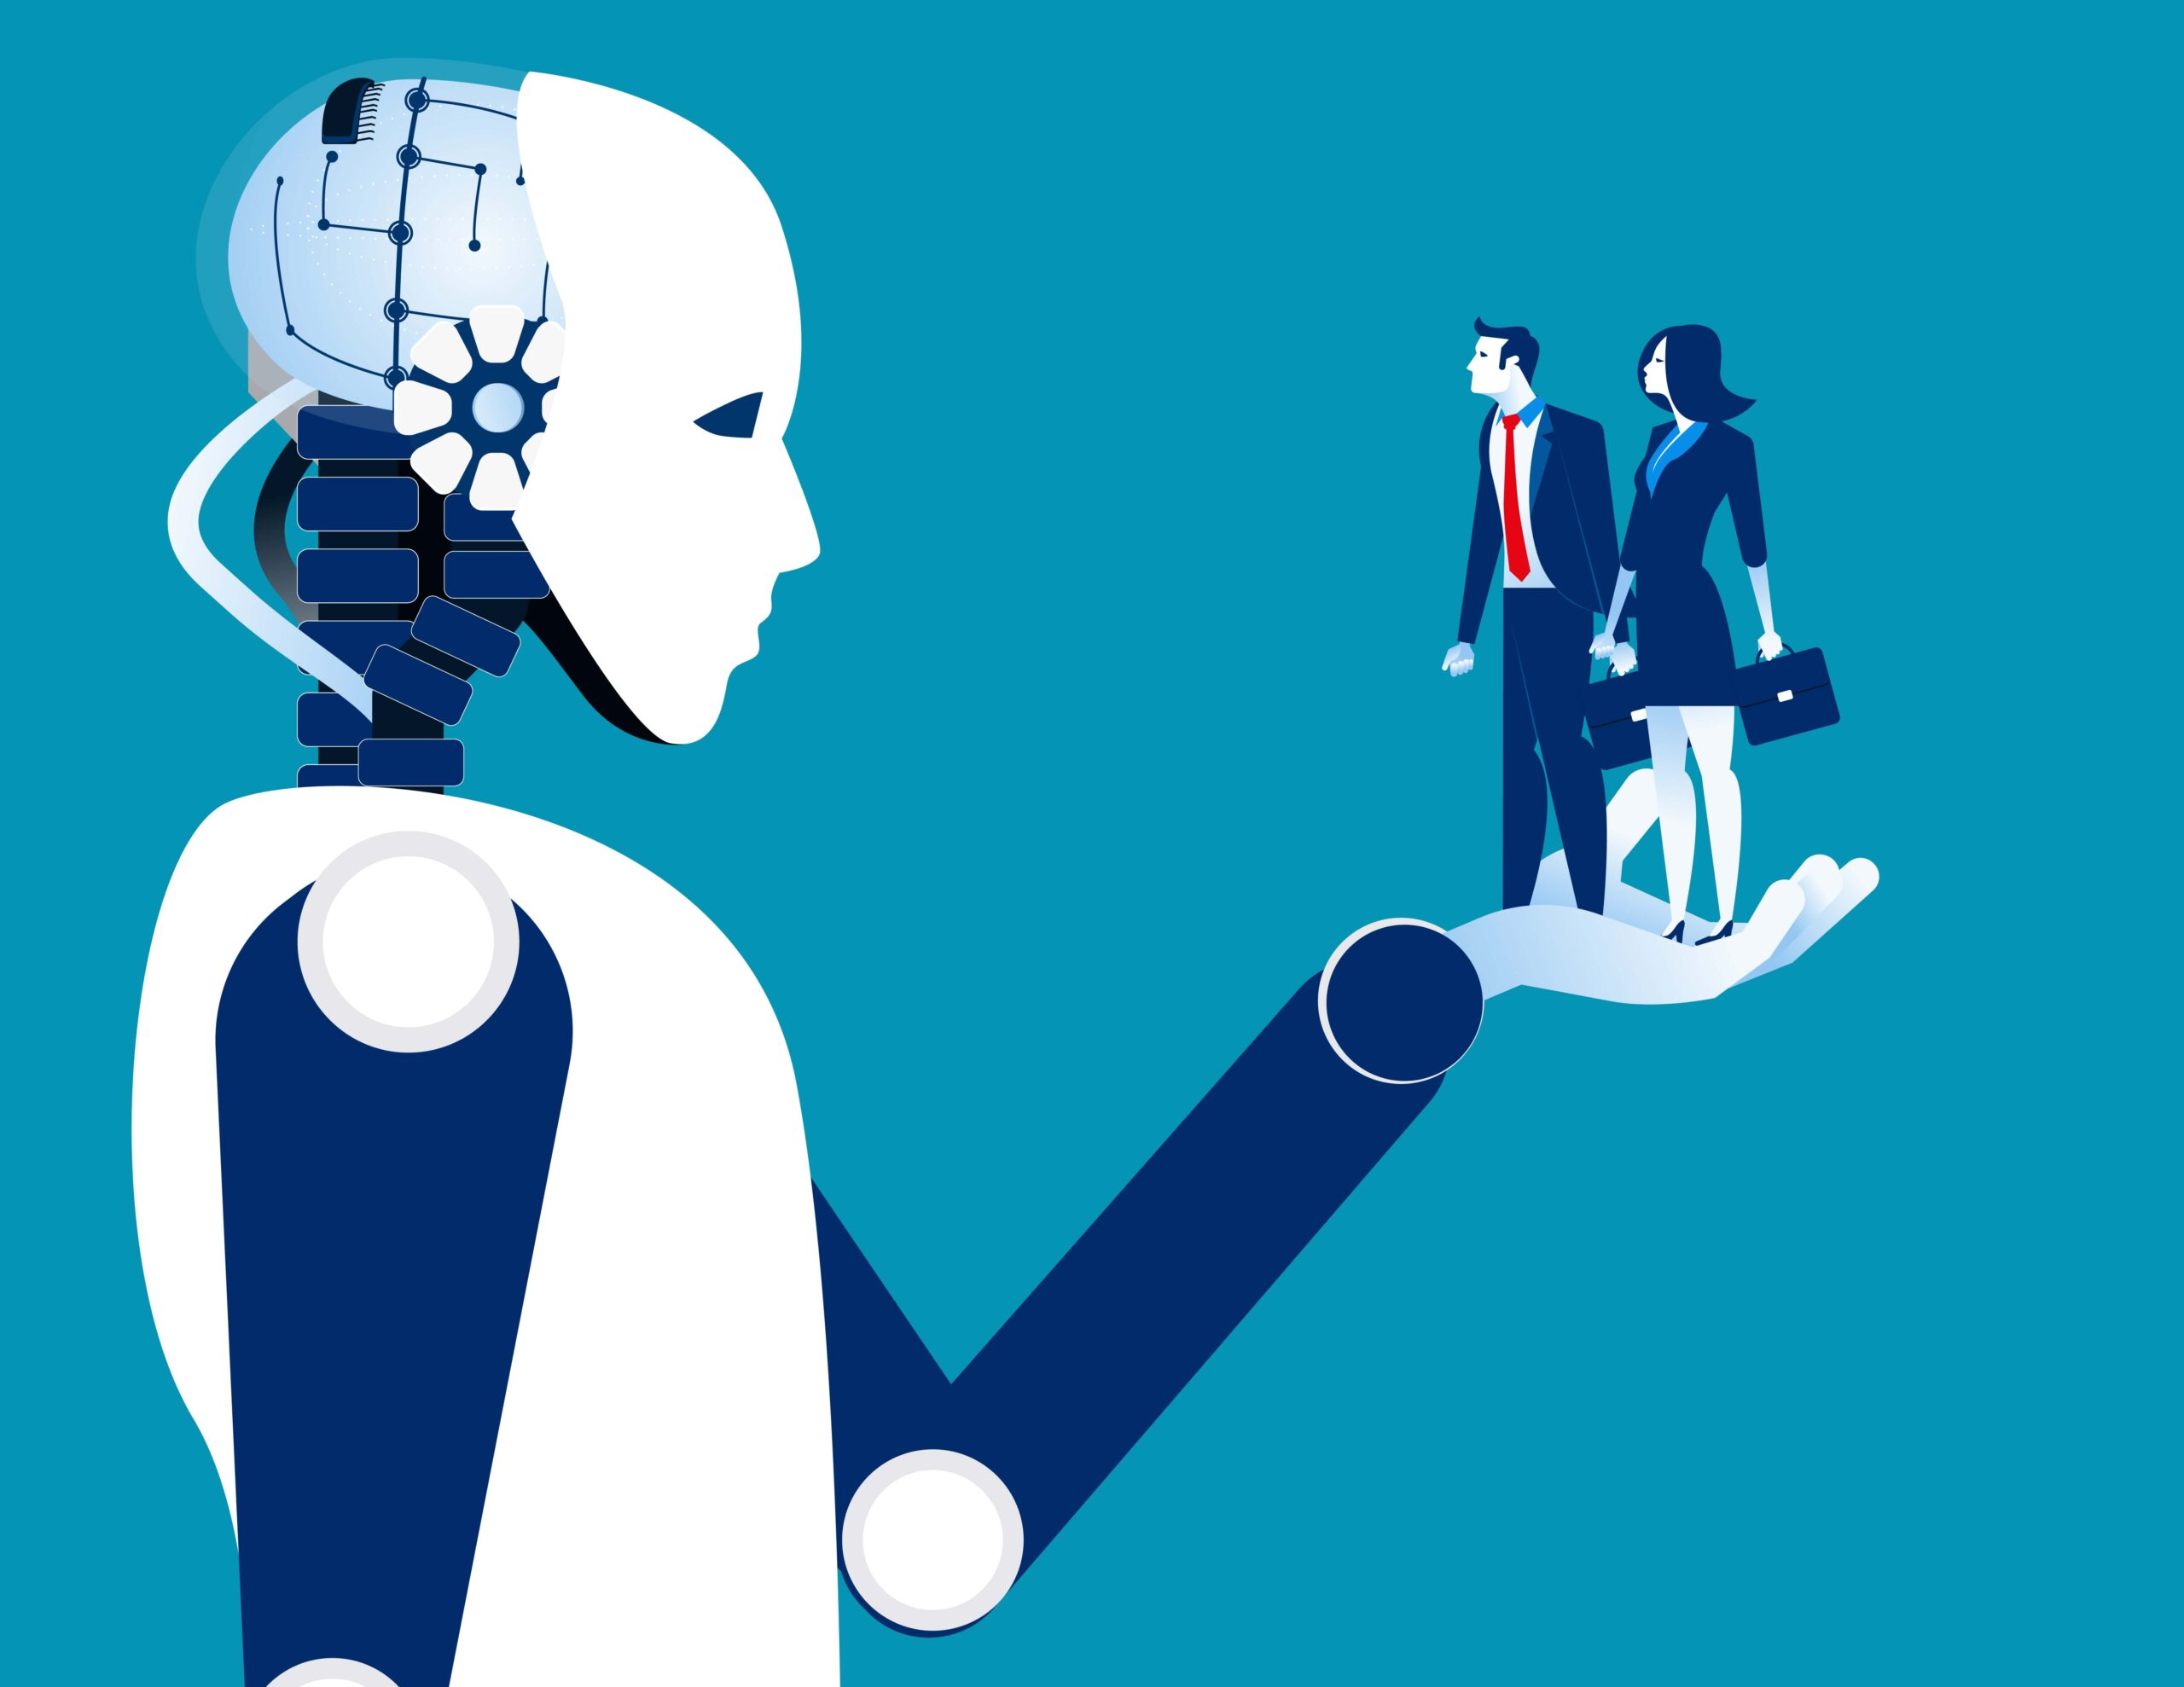 Image of a robot holding two business people, the cover image for the Working Identities report.